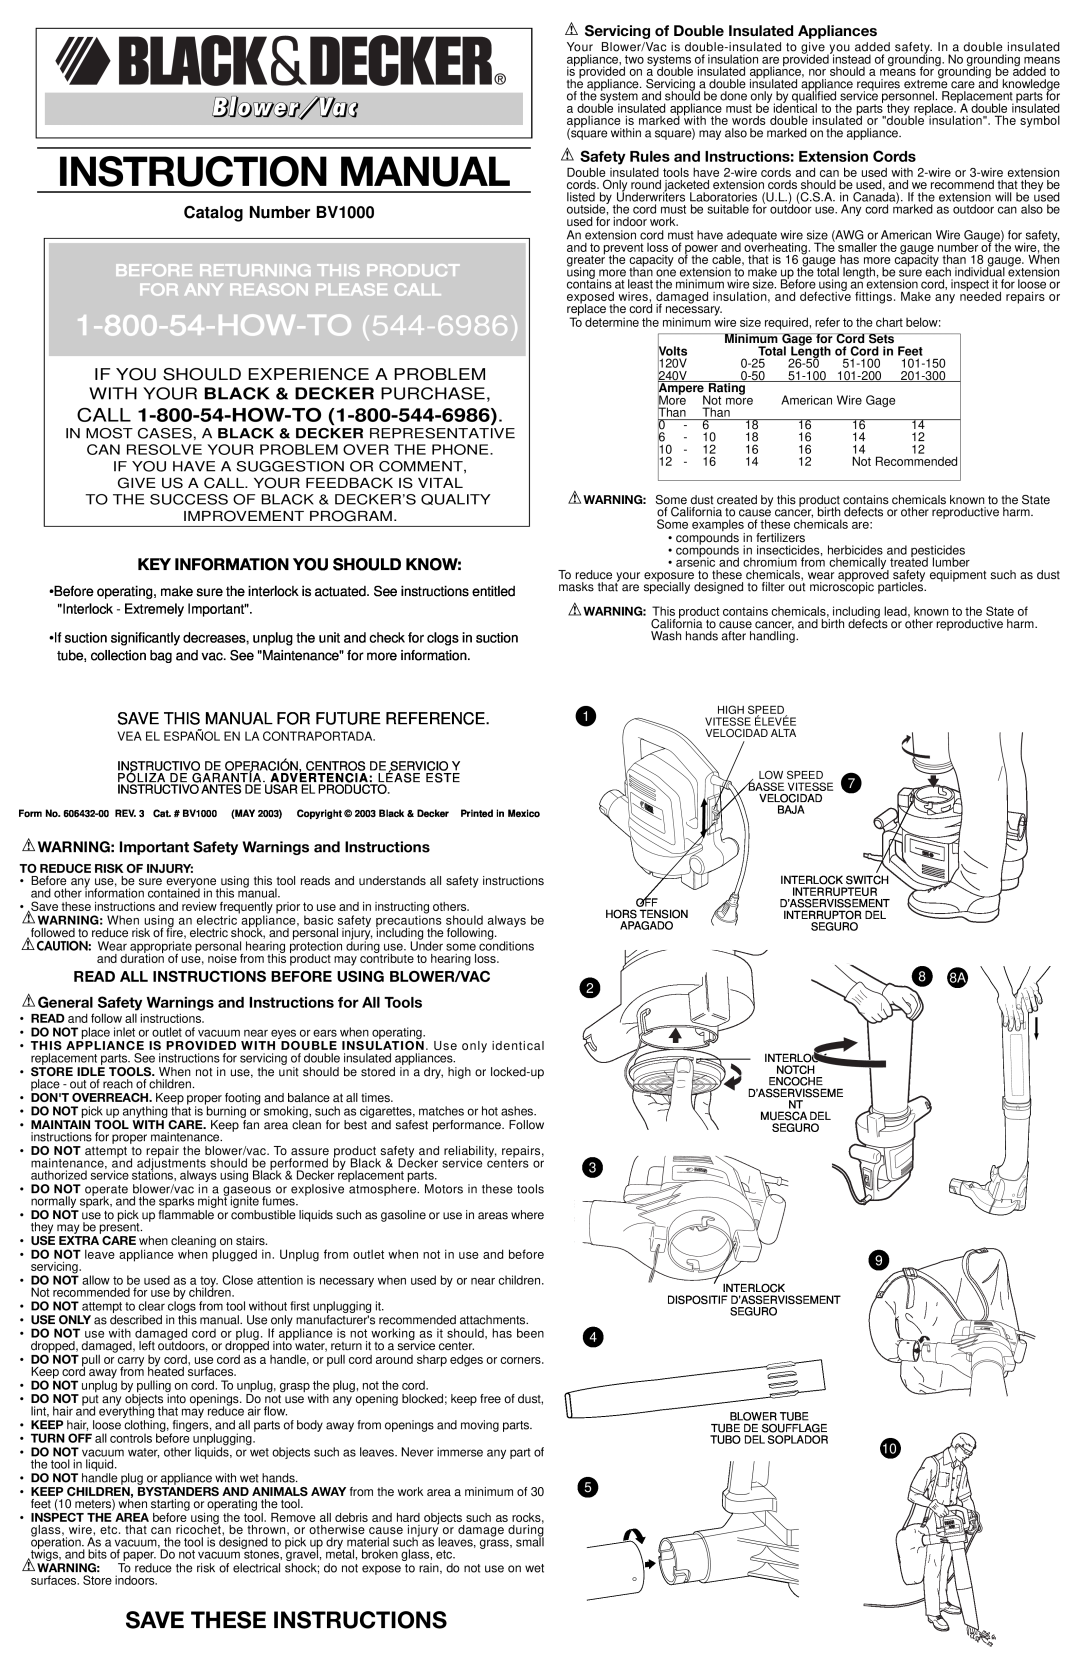 Black & Decker 606432-00 instruction manual Catalog Number BV1000, Key Information You Should Know, 8 8A, How-To 